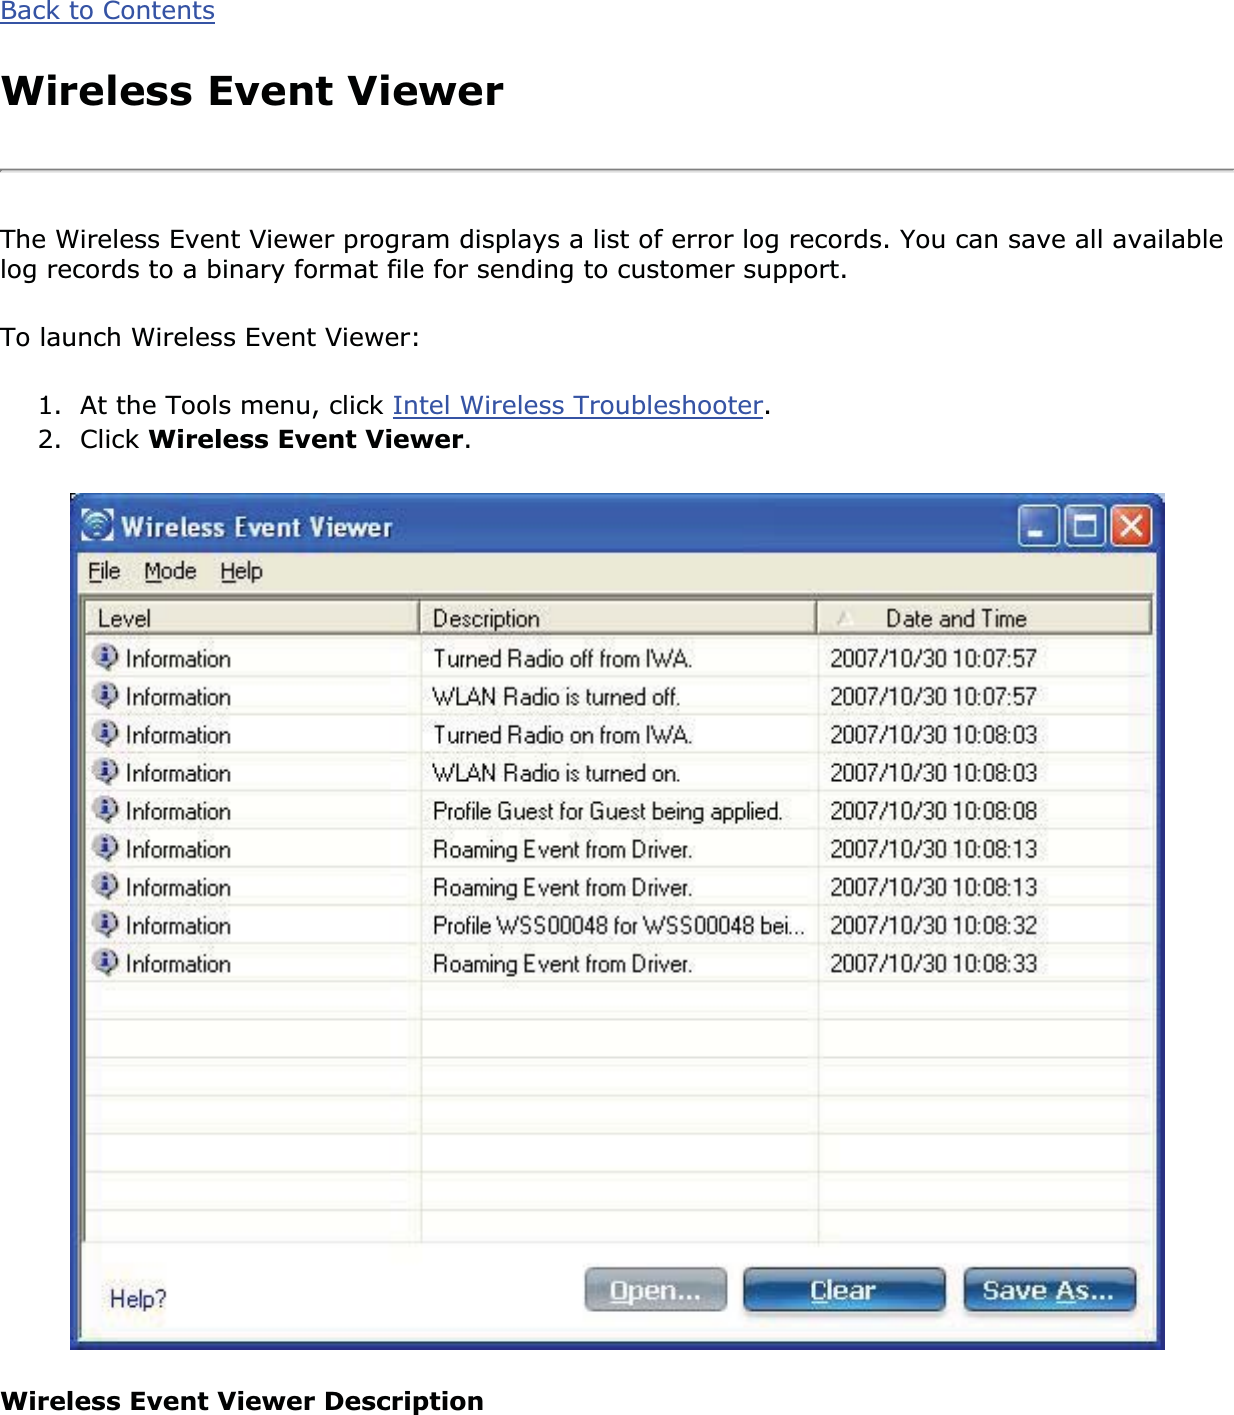 Back to ContentsWireless Event ViewerThe Wireless Event Viewer program displays a list of error log records. You can save all available log records to a binary format file for sending to customer support. To launch Wireless Event Viewer:1. At the Tools menu, click Intel Wireless Troubleshooter.2. Click Wireless Event Viewer.Wireless Event Viewer Description